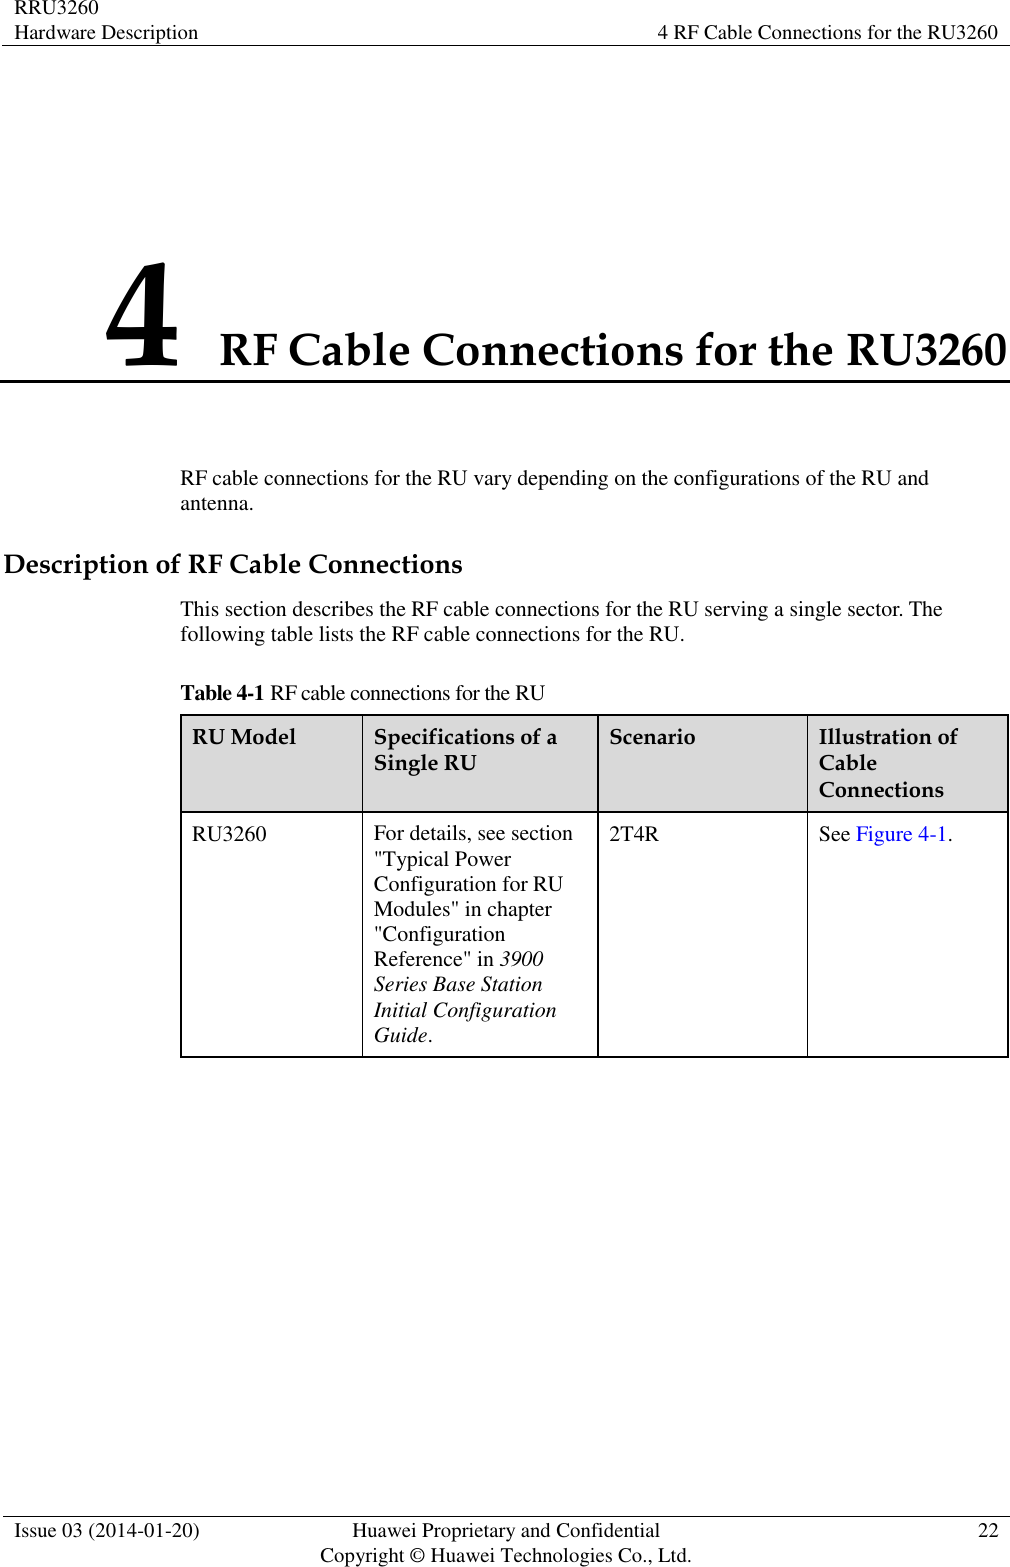 RRU3260 Hardware Description 4 RF Cable Connections for the RU3260  Issue 03 (2014-01-20) Huawei Proprietary and Confidential                                     Copyright © Huawei Technologies Co., Ltd. 22  4 RF Cable Connections for the RU3260 RF cable connections for the RU vary depending on the configurations of the RU and antenna. Description of RF Cable Connections This section describes the RF cable connections for the RU serving a single sector. The following table lists the RF cable connections for the RU. Table 4-1 RF cable connections for the RU RU Model Specifications of a Single RU Scenario Illustration of Cable Connections RU3260 For details, see section &quot;Typical Power Configuration for RU Modules&quot; in chapter &quot;Configuration Reference&quot; in 3900 Series Base Station Initial Configuration Guide. 2T4R See Figure 4-1.  